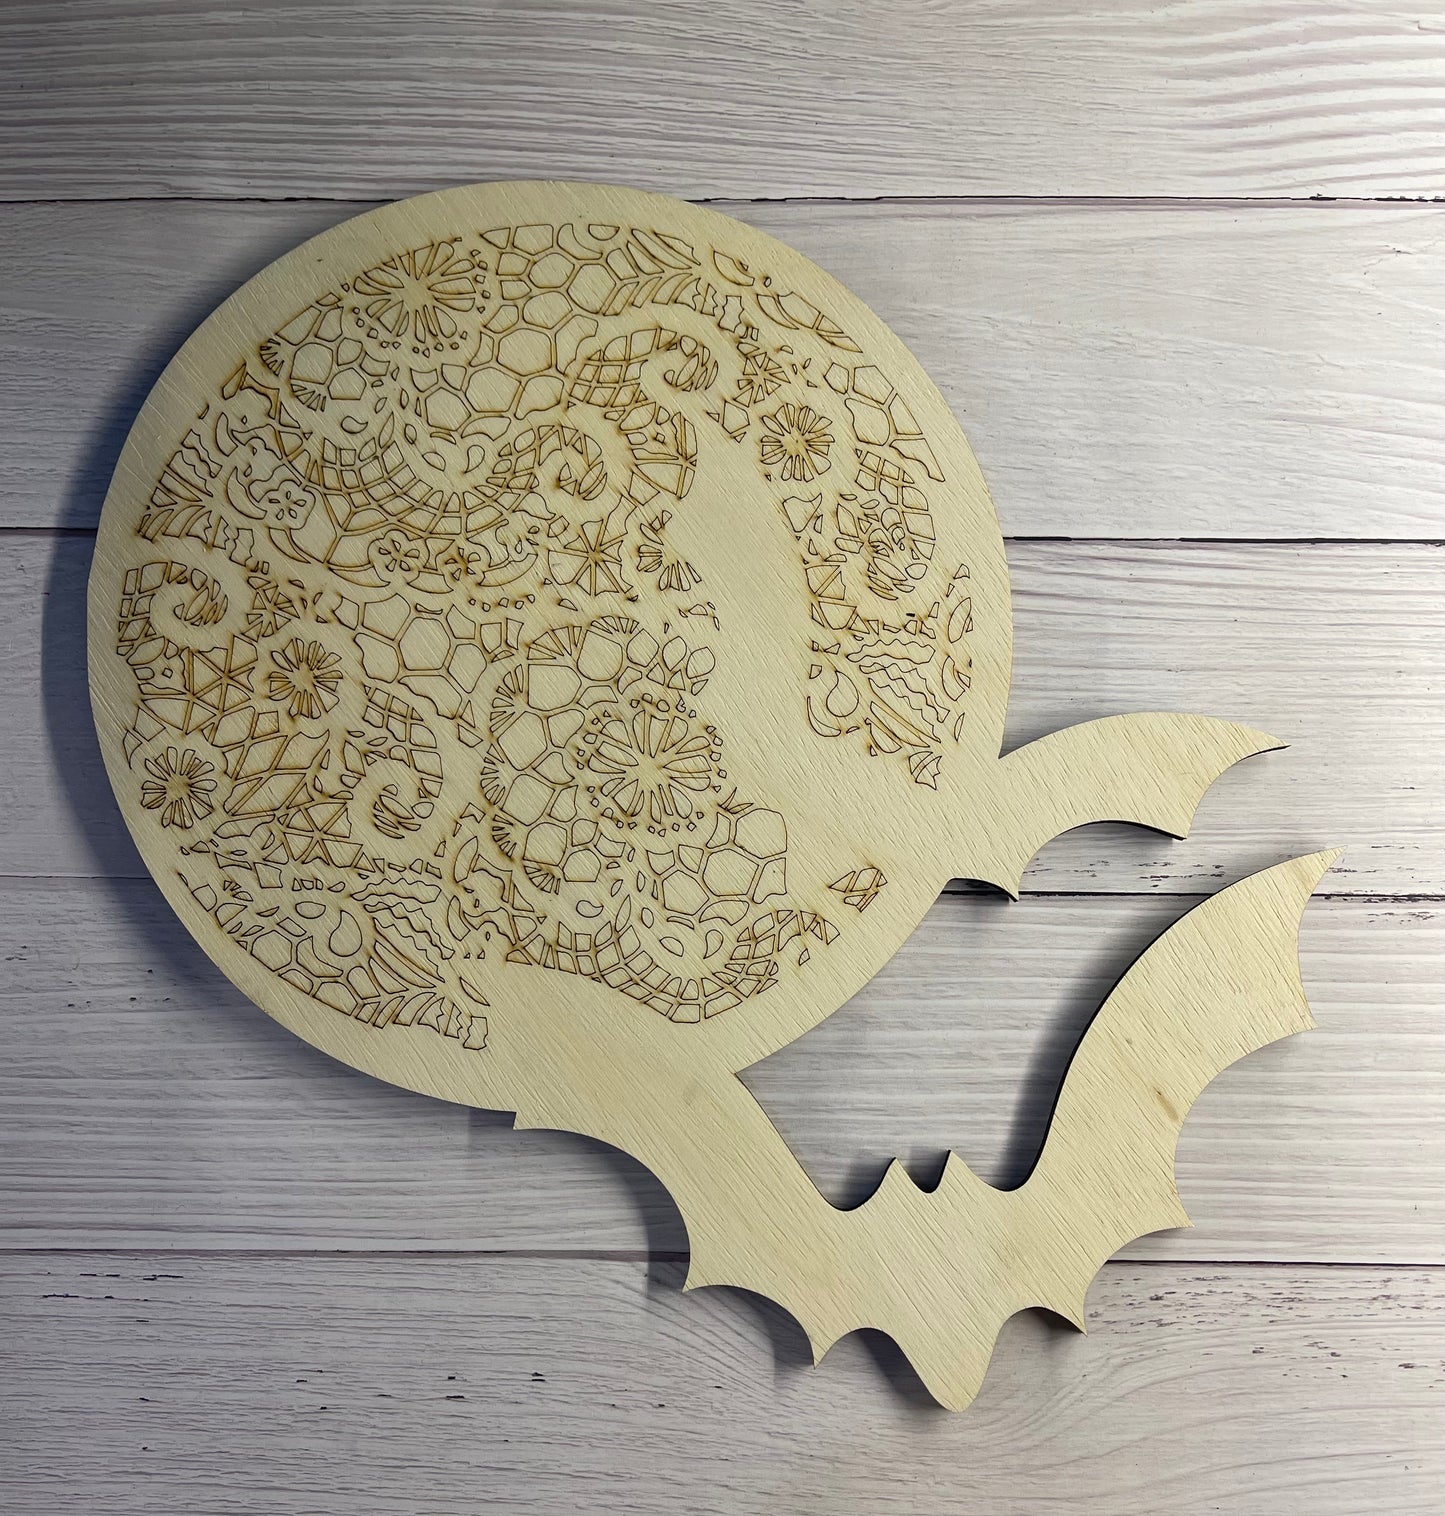 Bats with Lace Moon Wood Cut Out. Unfinished Wood frame. Resin art frame. DIY wood cutout. Unfinished laser cut wood resin frame.